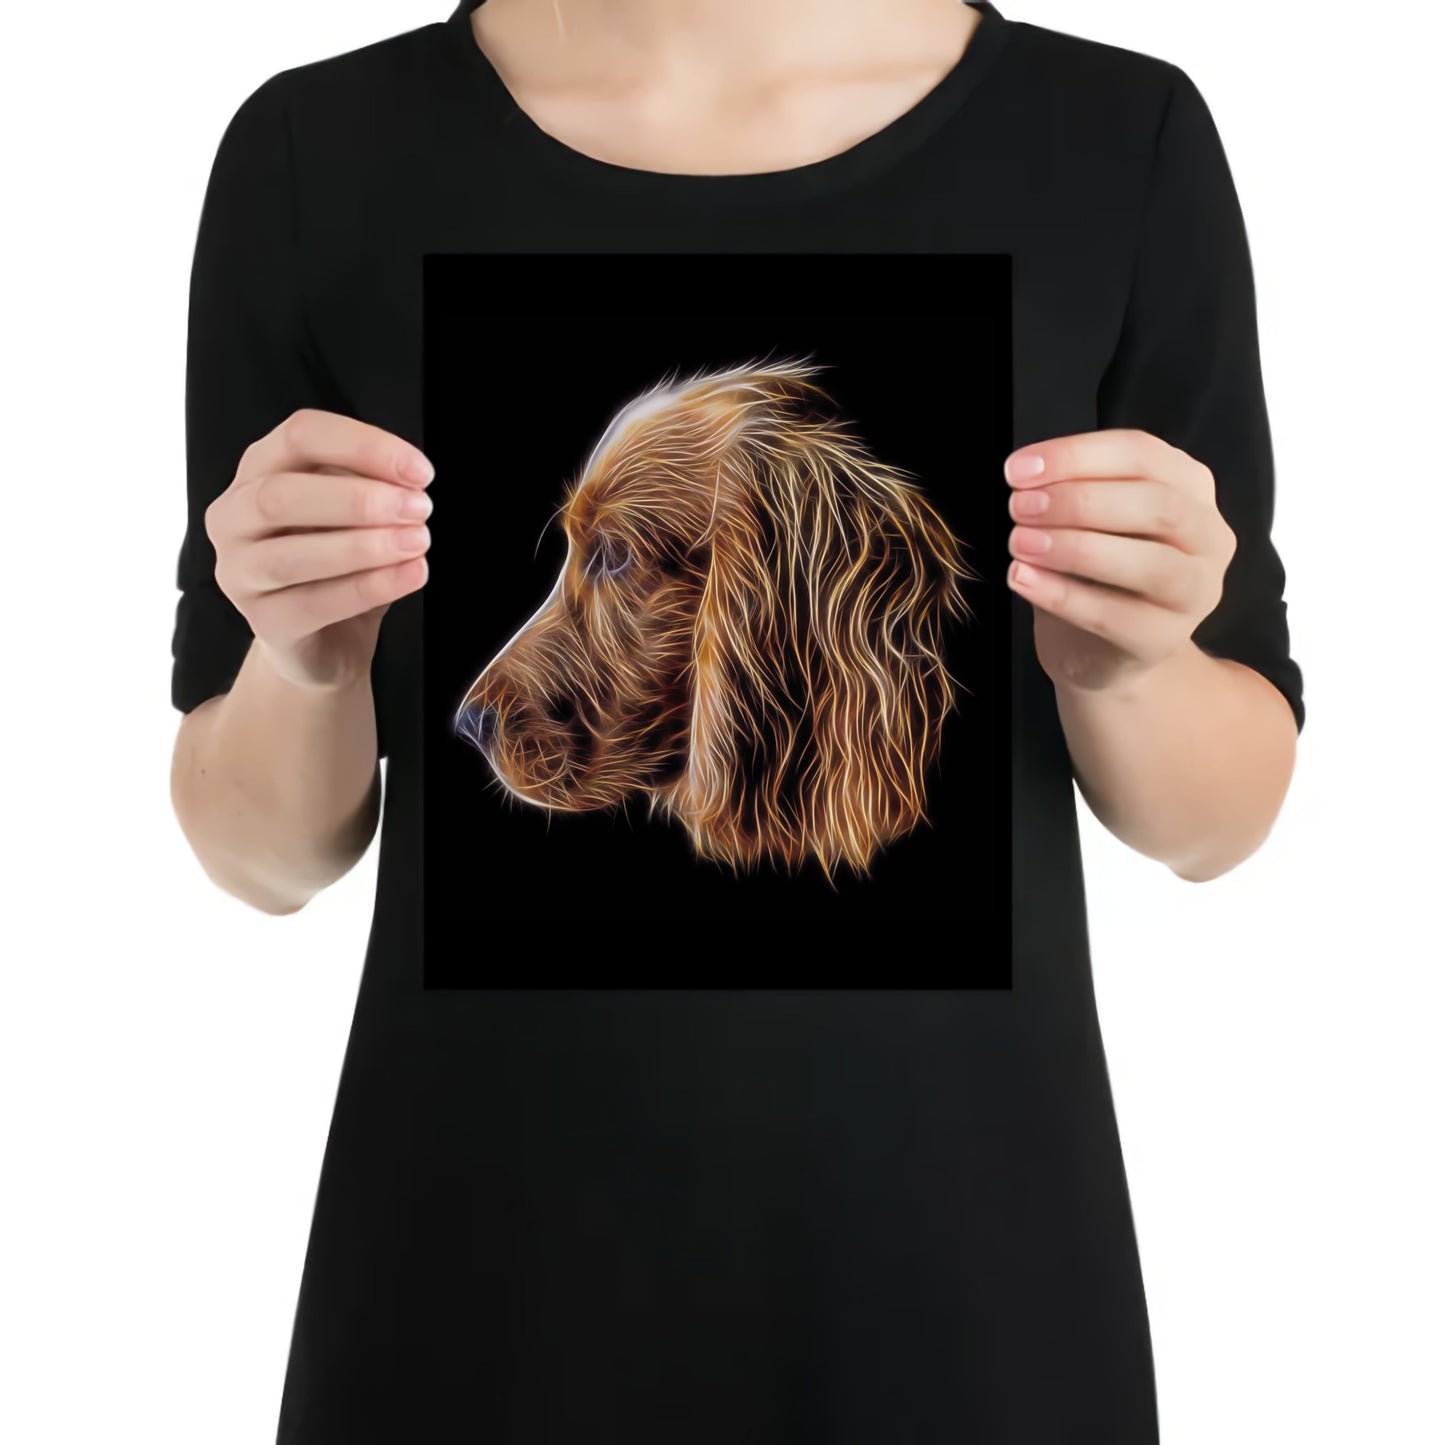 Red Working Cocker Spaniel Metal Wall Plaque with Stunning Fractal Art Design